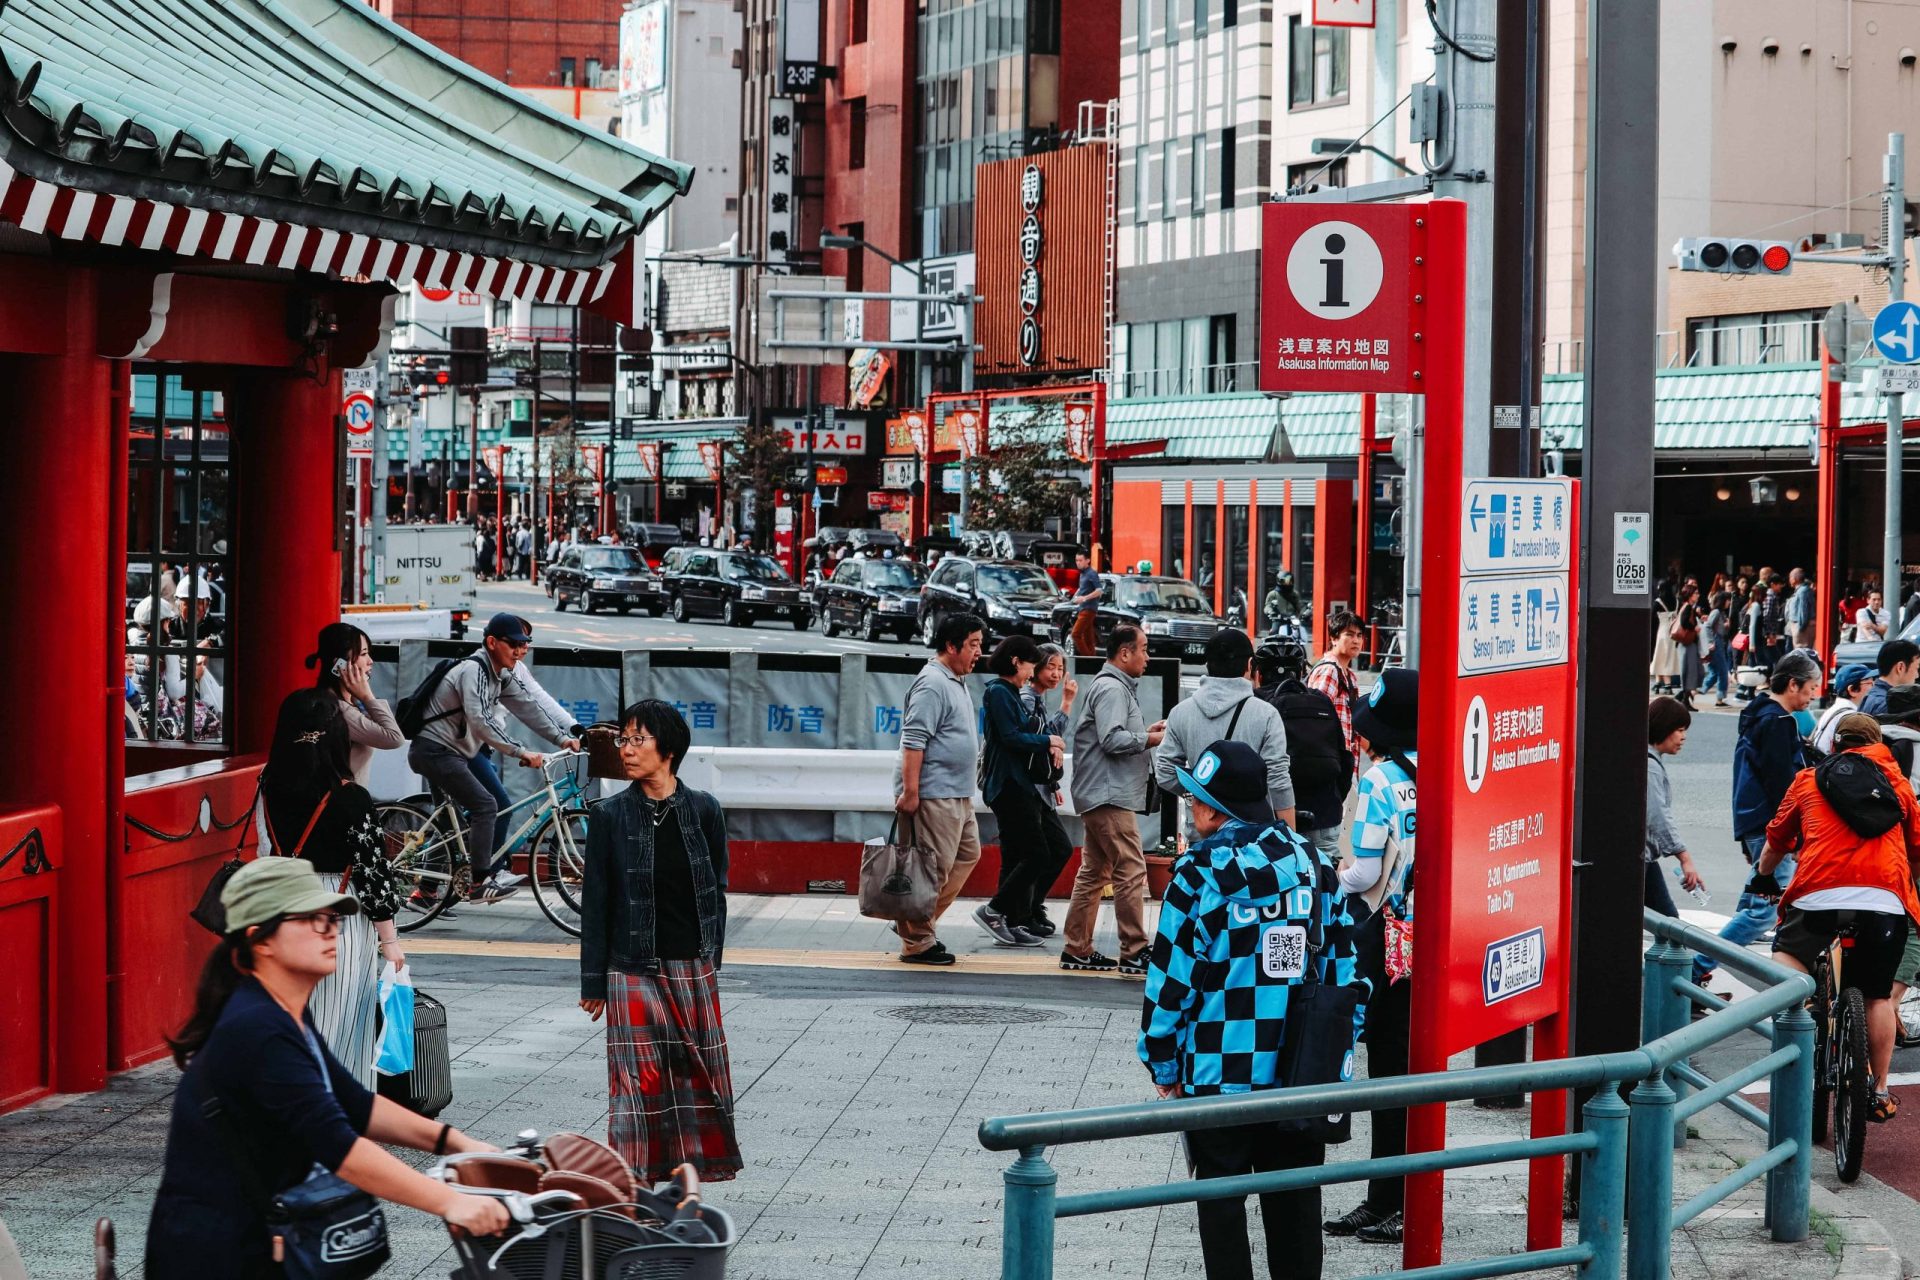 people in the corener streets of Japan